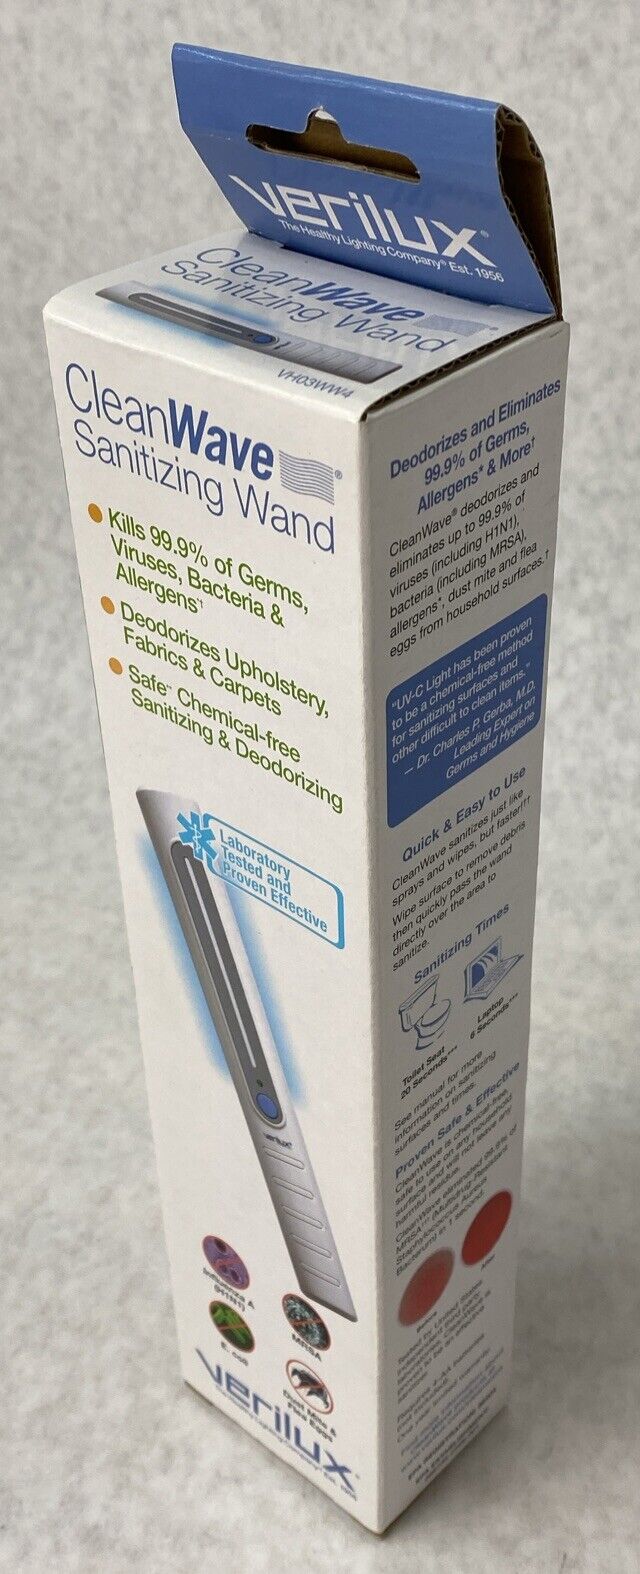 Verilux VH03WW4 CleanWave Portable Wand